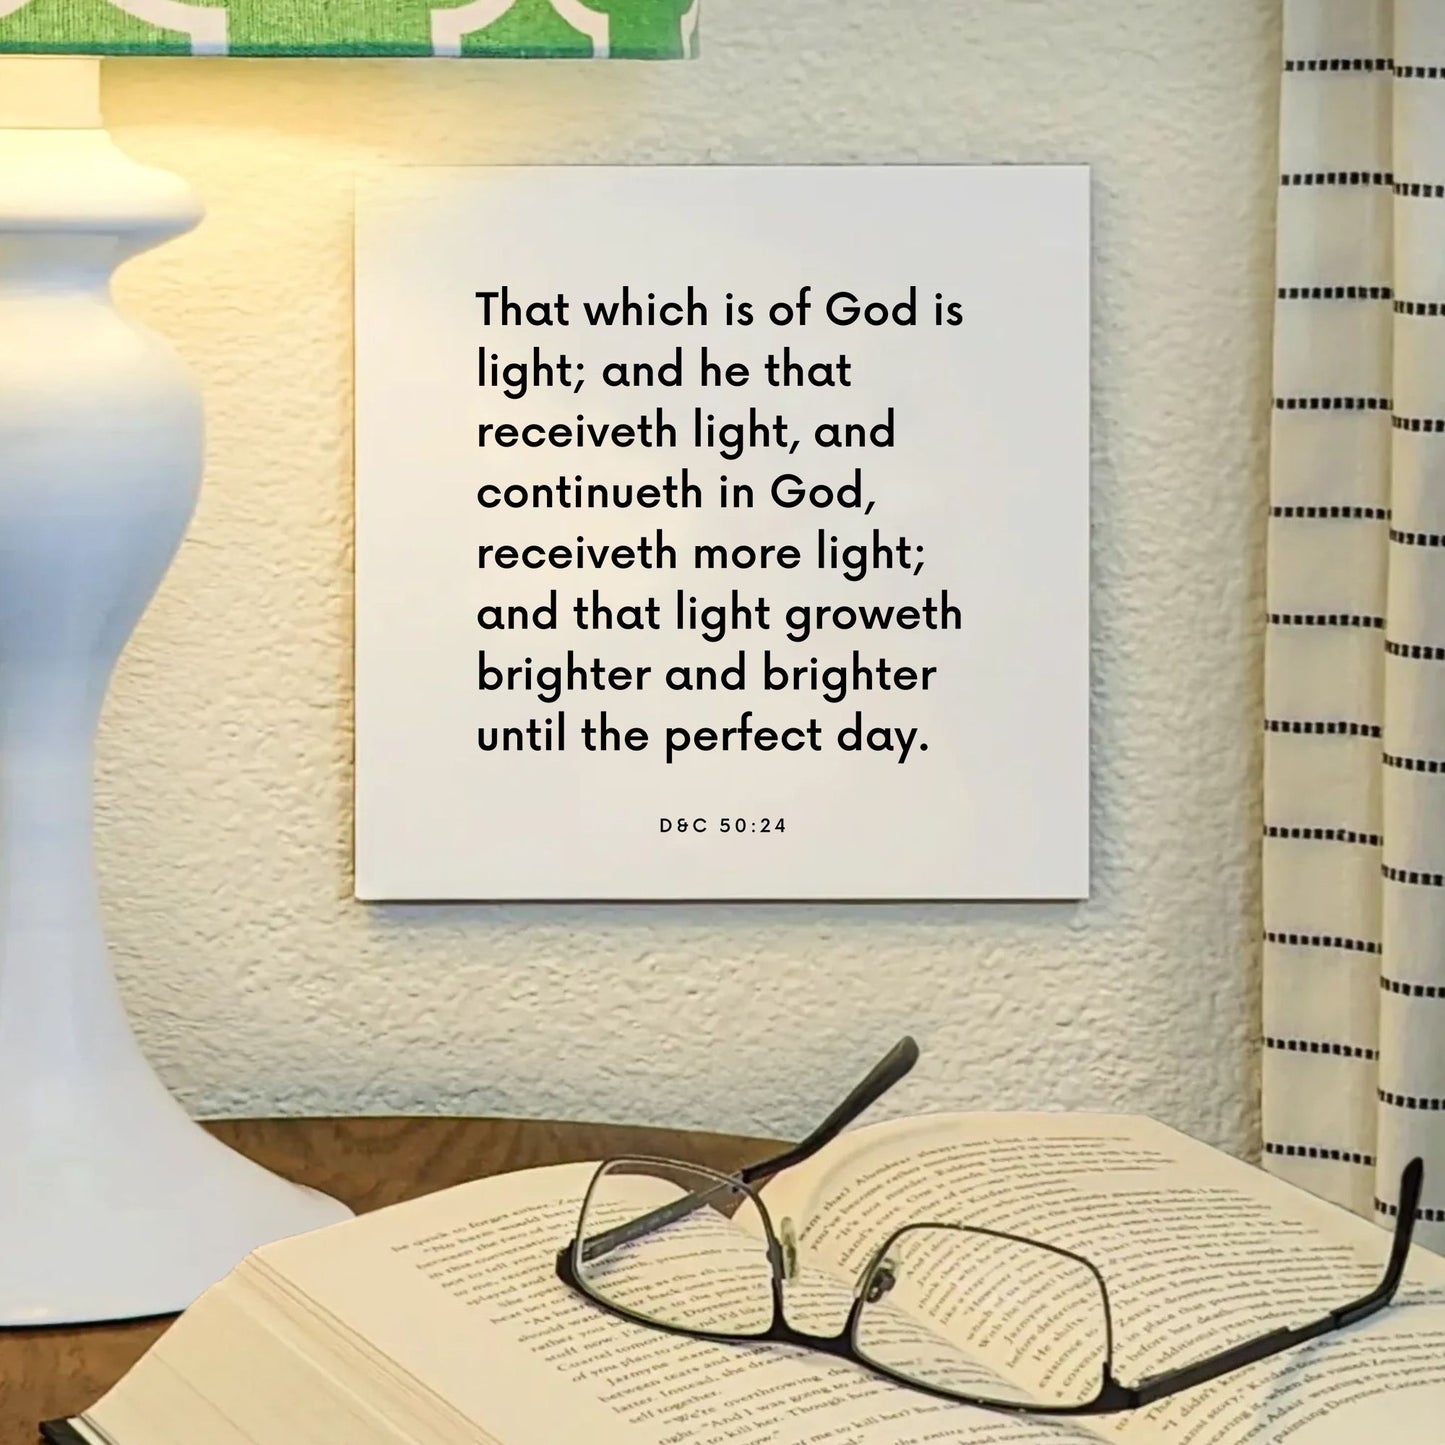 Lamp mouting of the scripture tile for D&C 50:24 - "That which is of God is light"